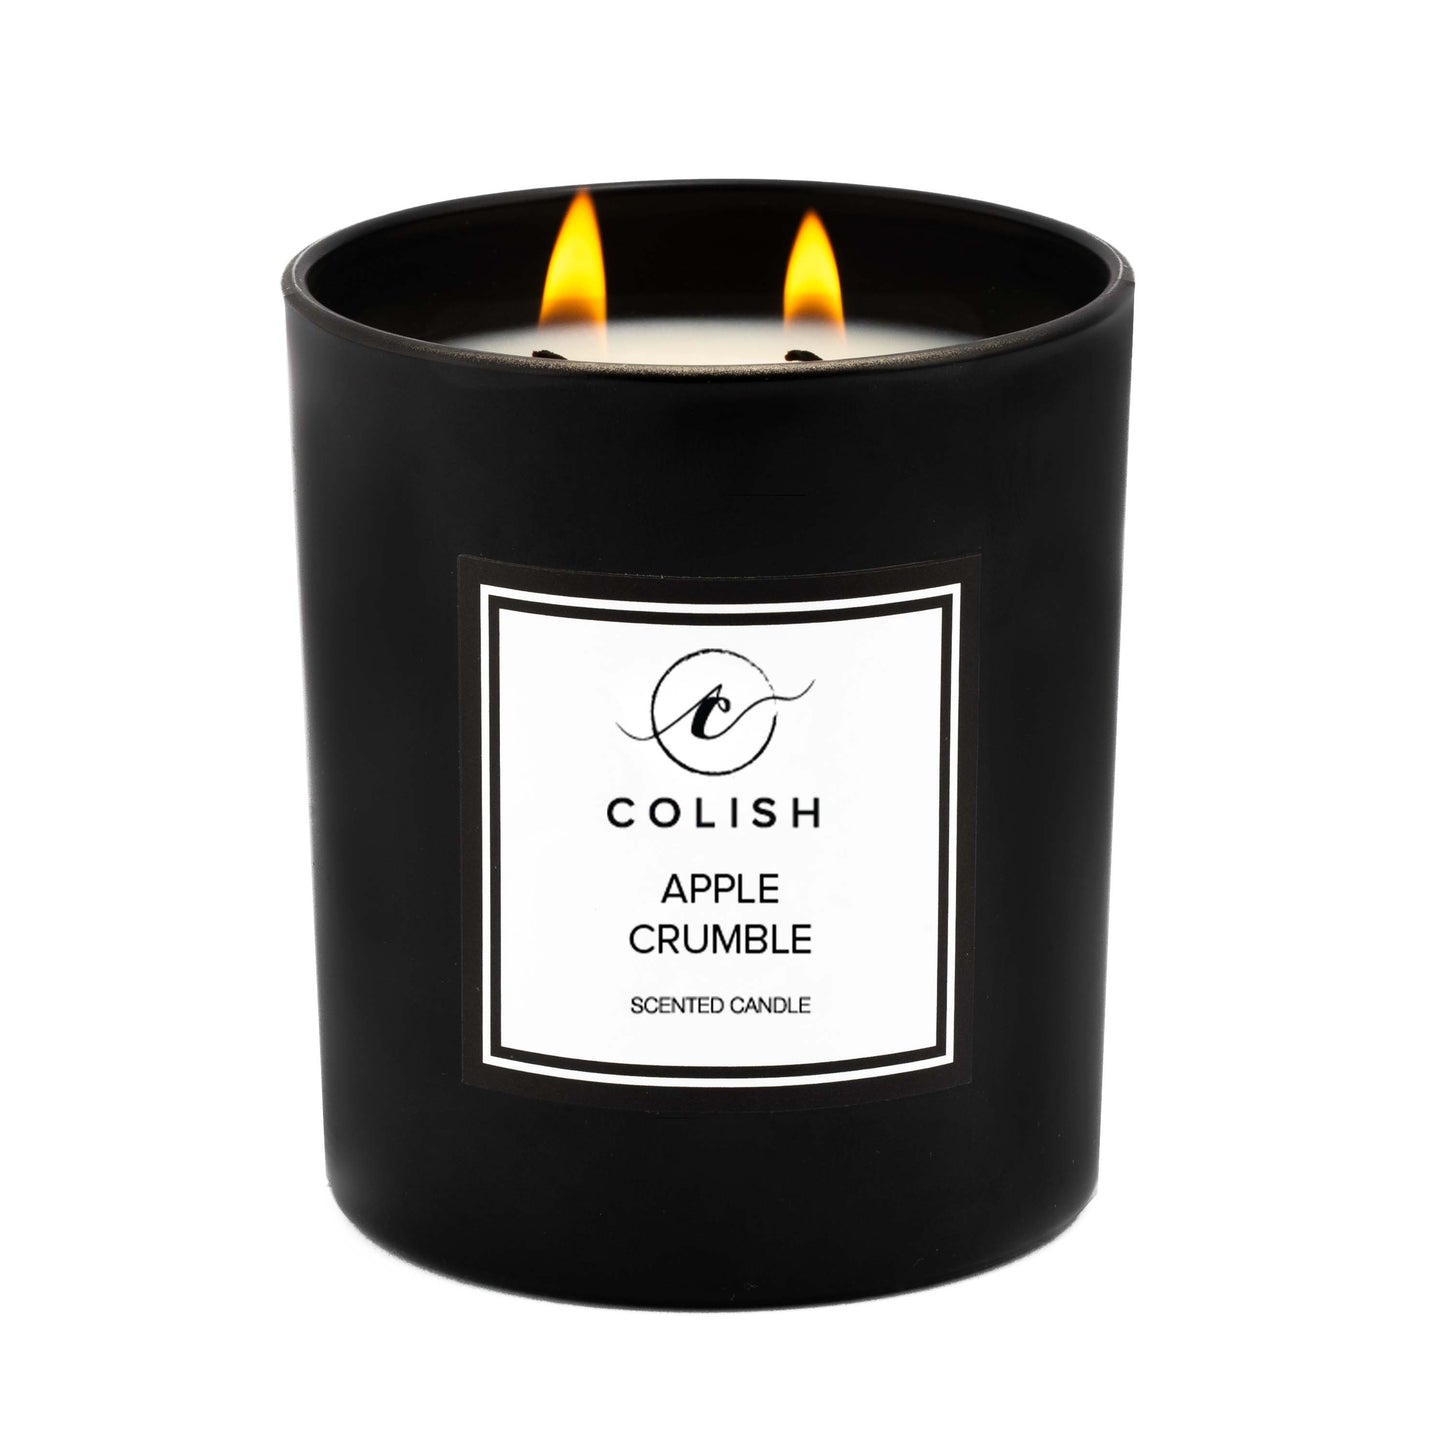 Apple Crumble Scented Candle Pakistan – COLISH